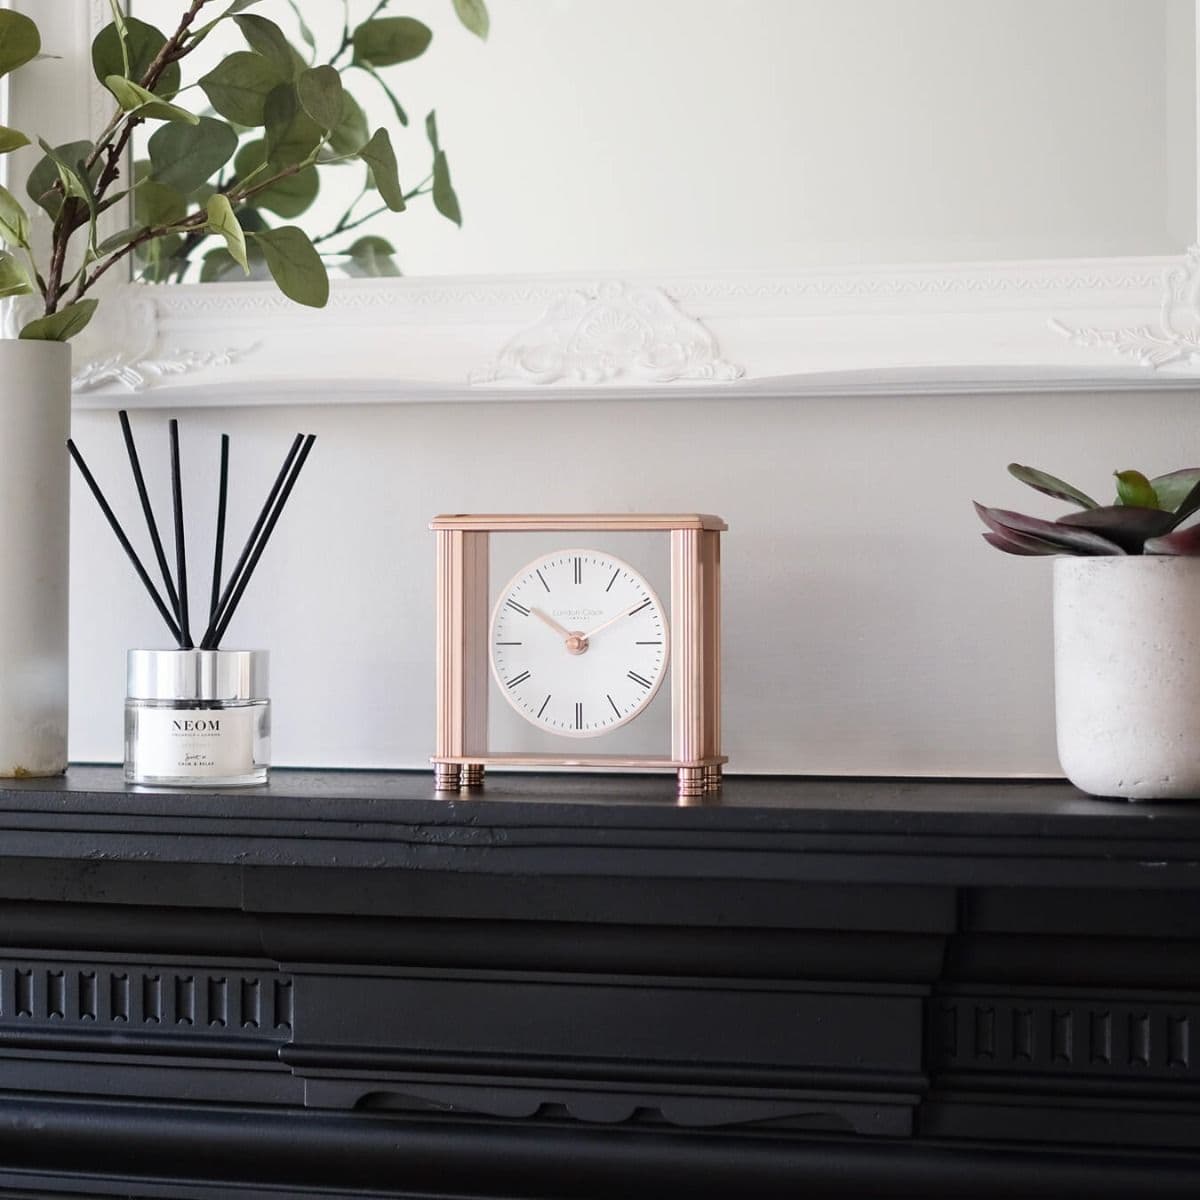 03215 London Clock Company Rose Coloured Metal And Glass Square Mantle Clock With Round Dial